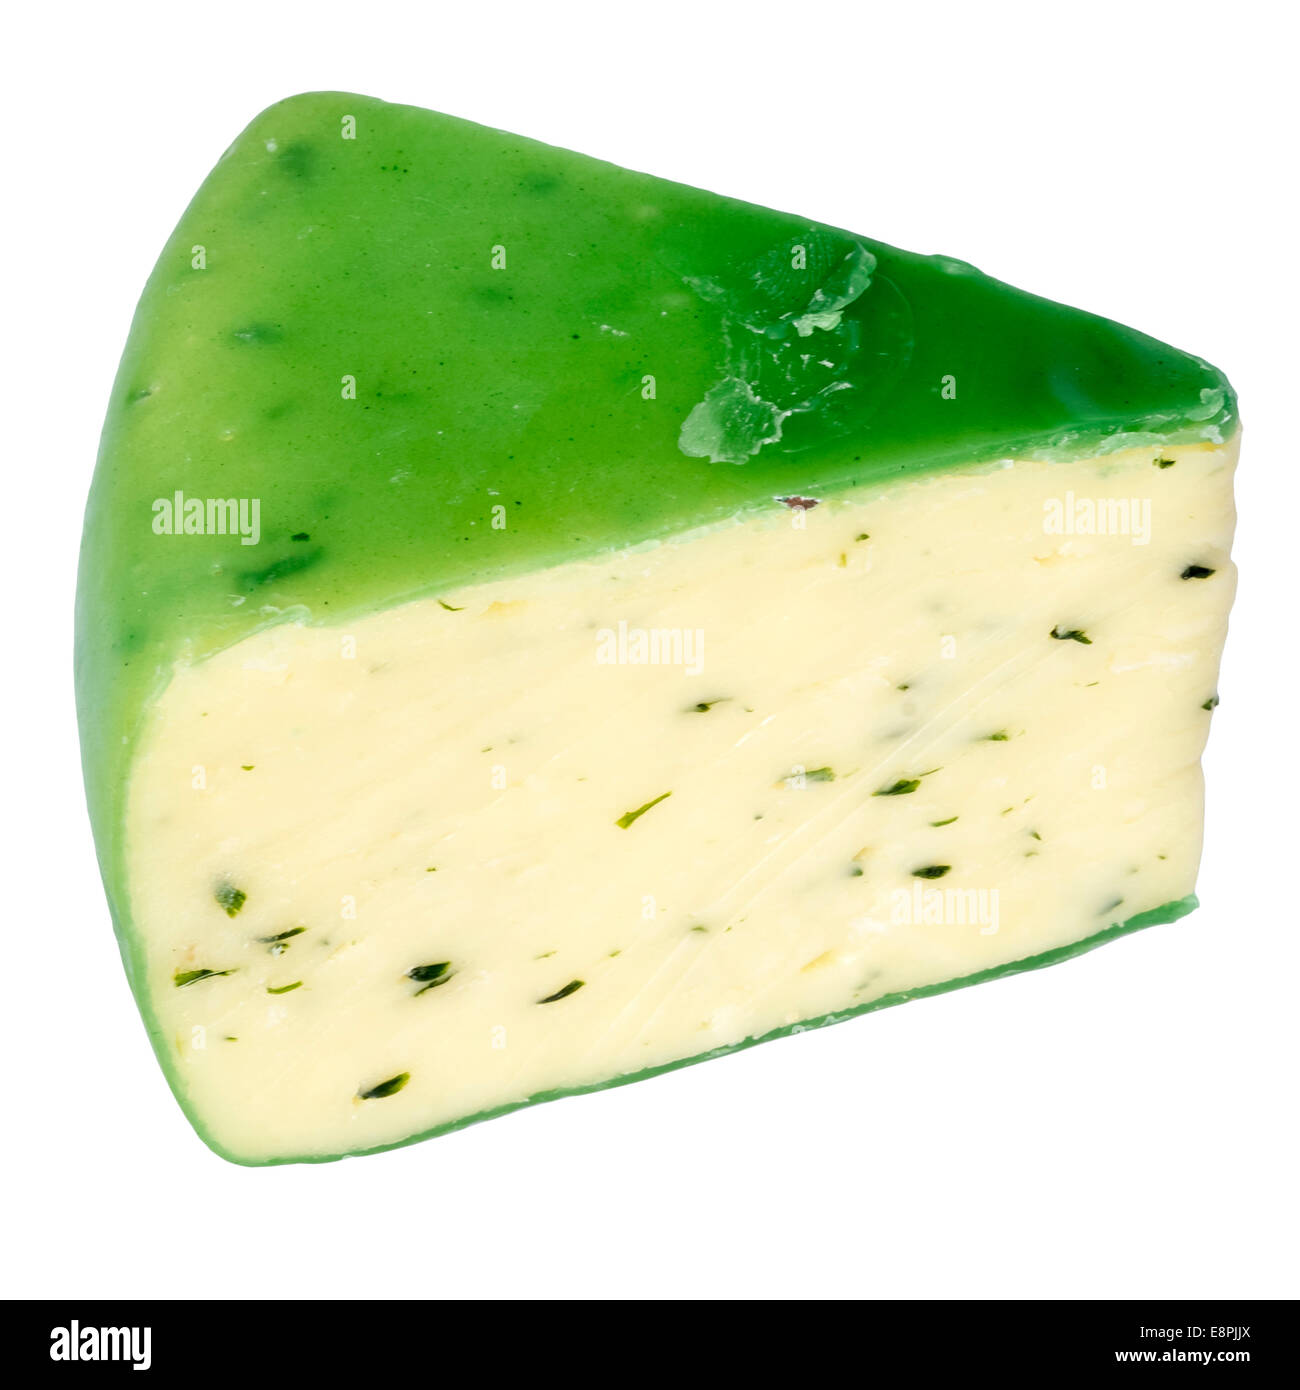 Wedge of Cheddar cheese & chives, cut out or isolated against a white background. Cheese sealed with green wax. Stock Photo